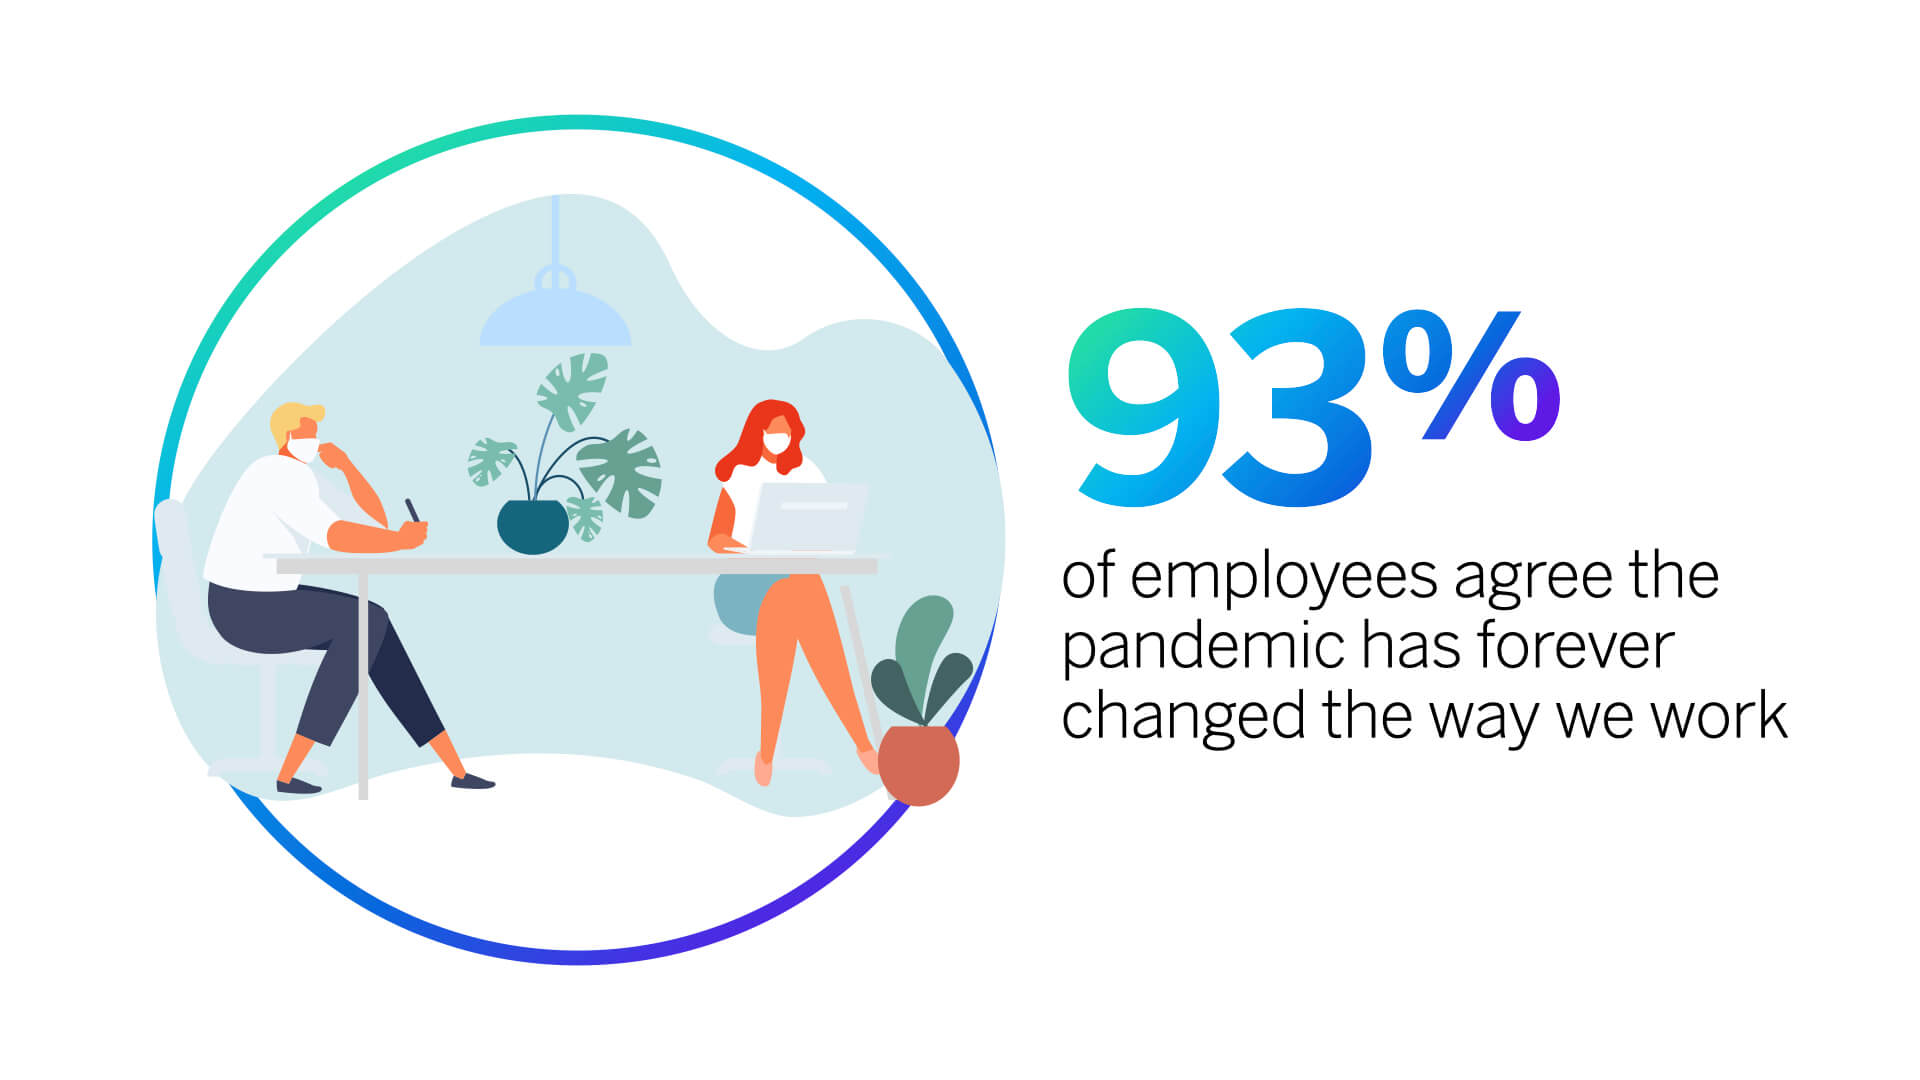 93% of employees agree the pandemic has forever changed the way we work